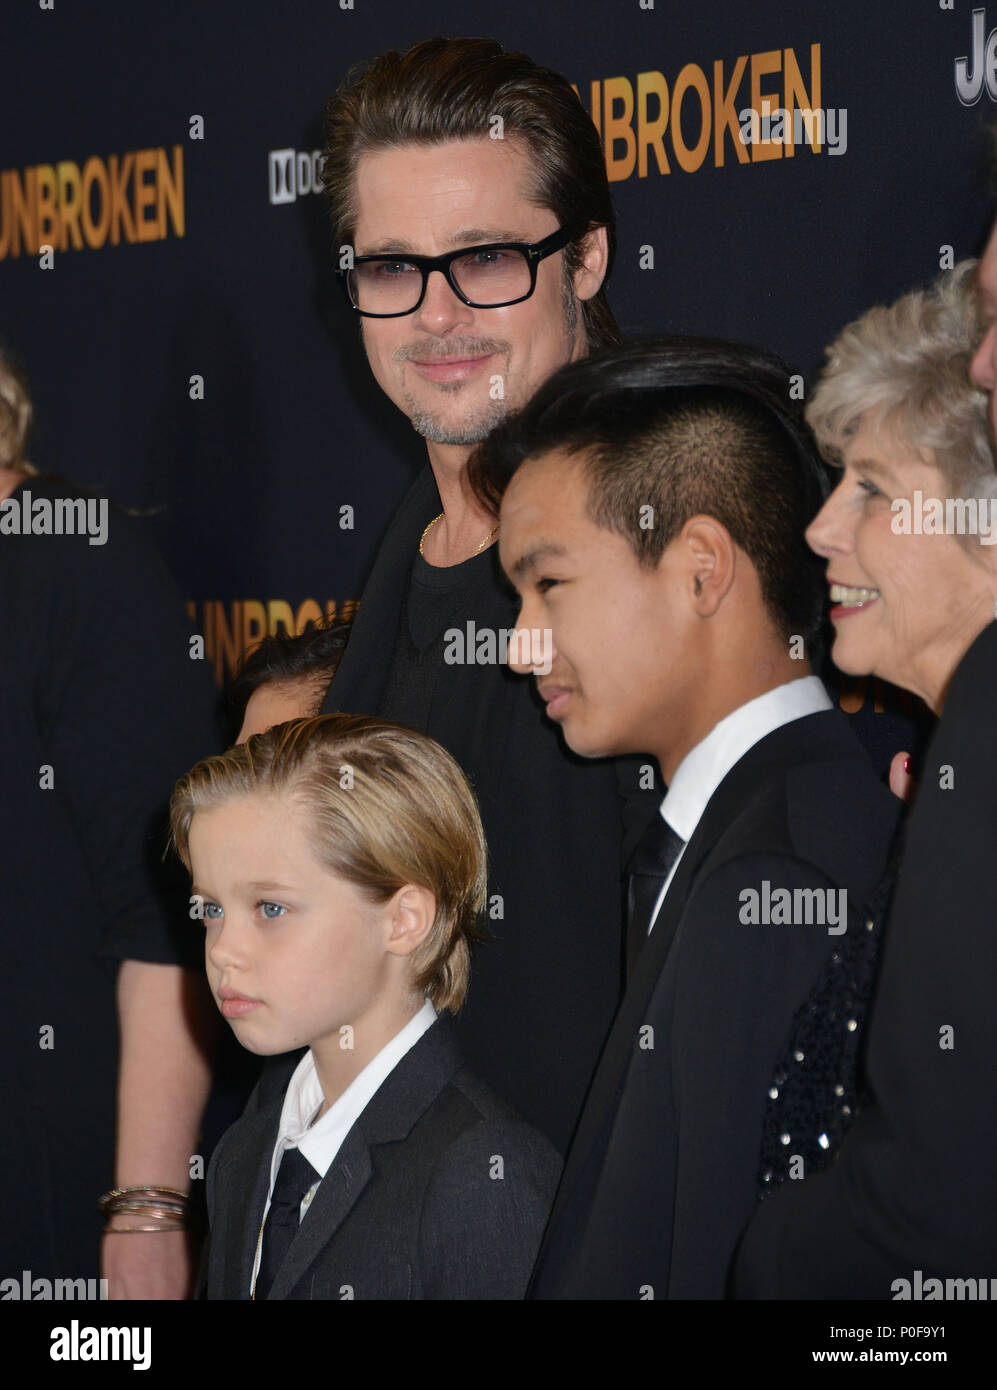 a Brad Pitt (C), (L-R) Pax Thien Jolie-Pitt, Shiloh Nouvel Jolie-Pitt,, Maddox Jolie-Pitt, Jane Pitt, and William Pitt 007  at the Unbroken Premiere at the Dolby Theatre in Los Angeles. Dec. 14, 2014a Brad Pitt (C), (L-R) Pax Thien Jolie-Pitt, Shiloh Nouvel Jolie-Pitt,, Maddox Jolie-Pitt, Jane Pitt, and William Pitt 007 ------------- Red Carpet Event, Vertical, USA, Film Industry, Celebrities,  Photography, Bestof, Arts Culture and Entertainment, Topix Celebrities fashion /  Vertical, Best of, Event in Hollywood Life - California,  Red Carpet and backstage, USA, Film Industry, Celebrities,  mo Stock Photo